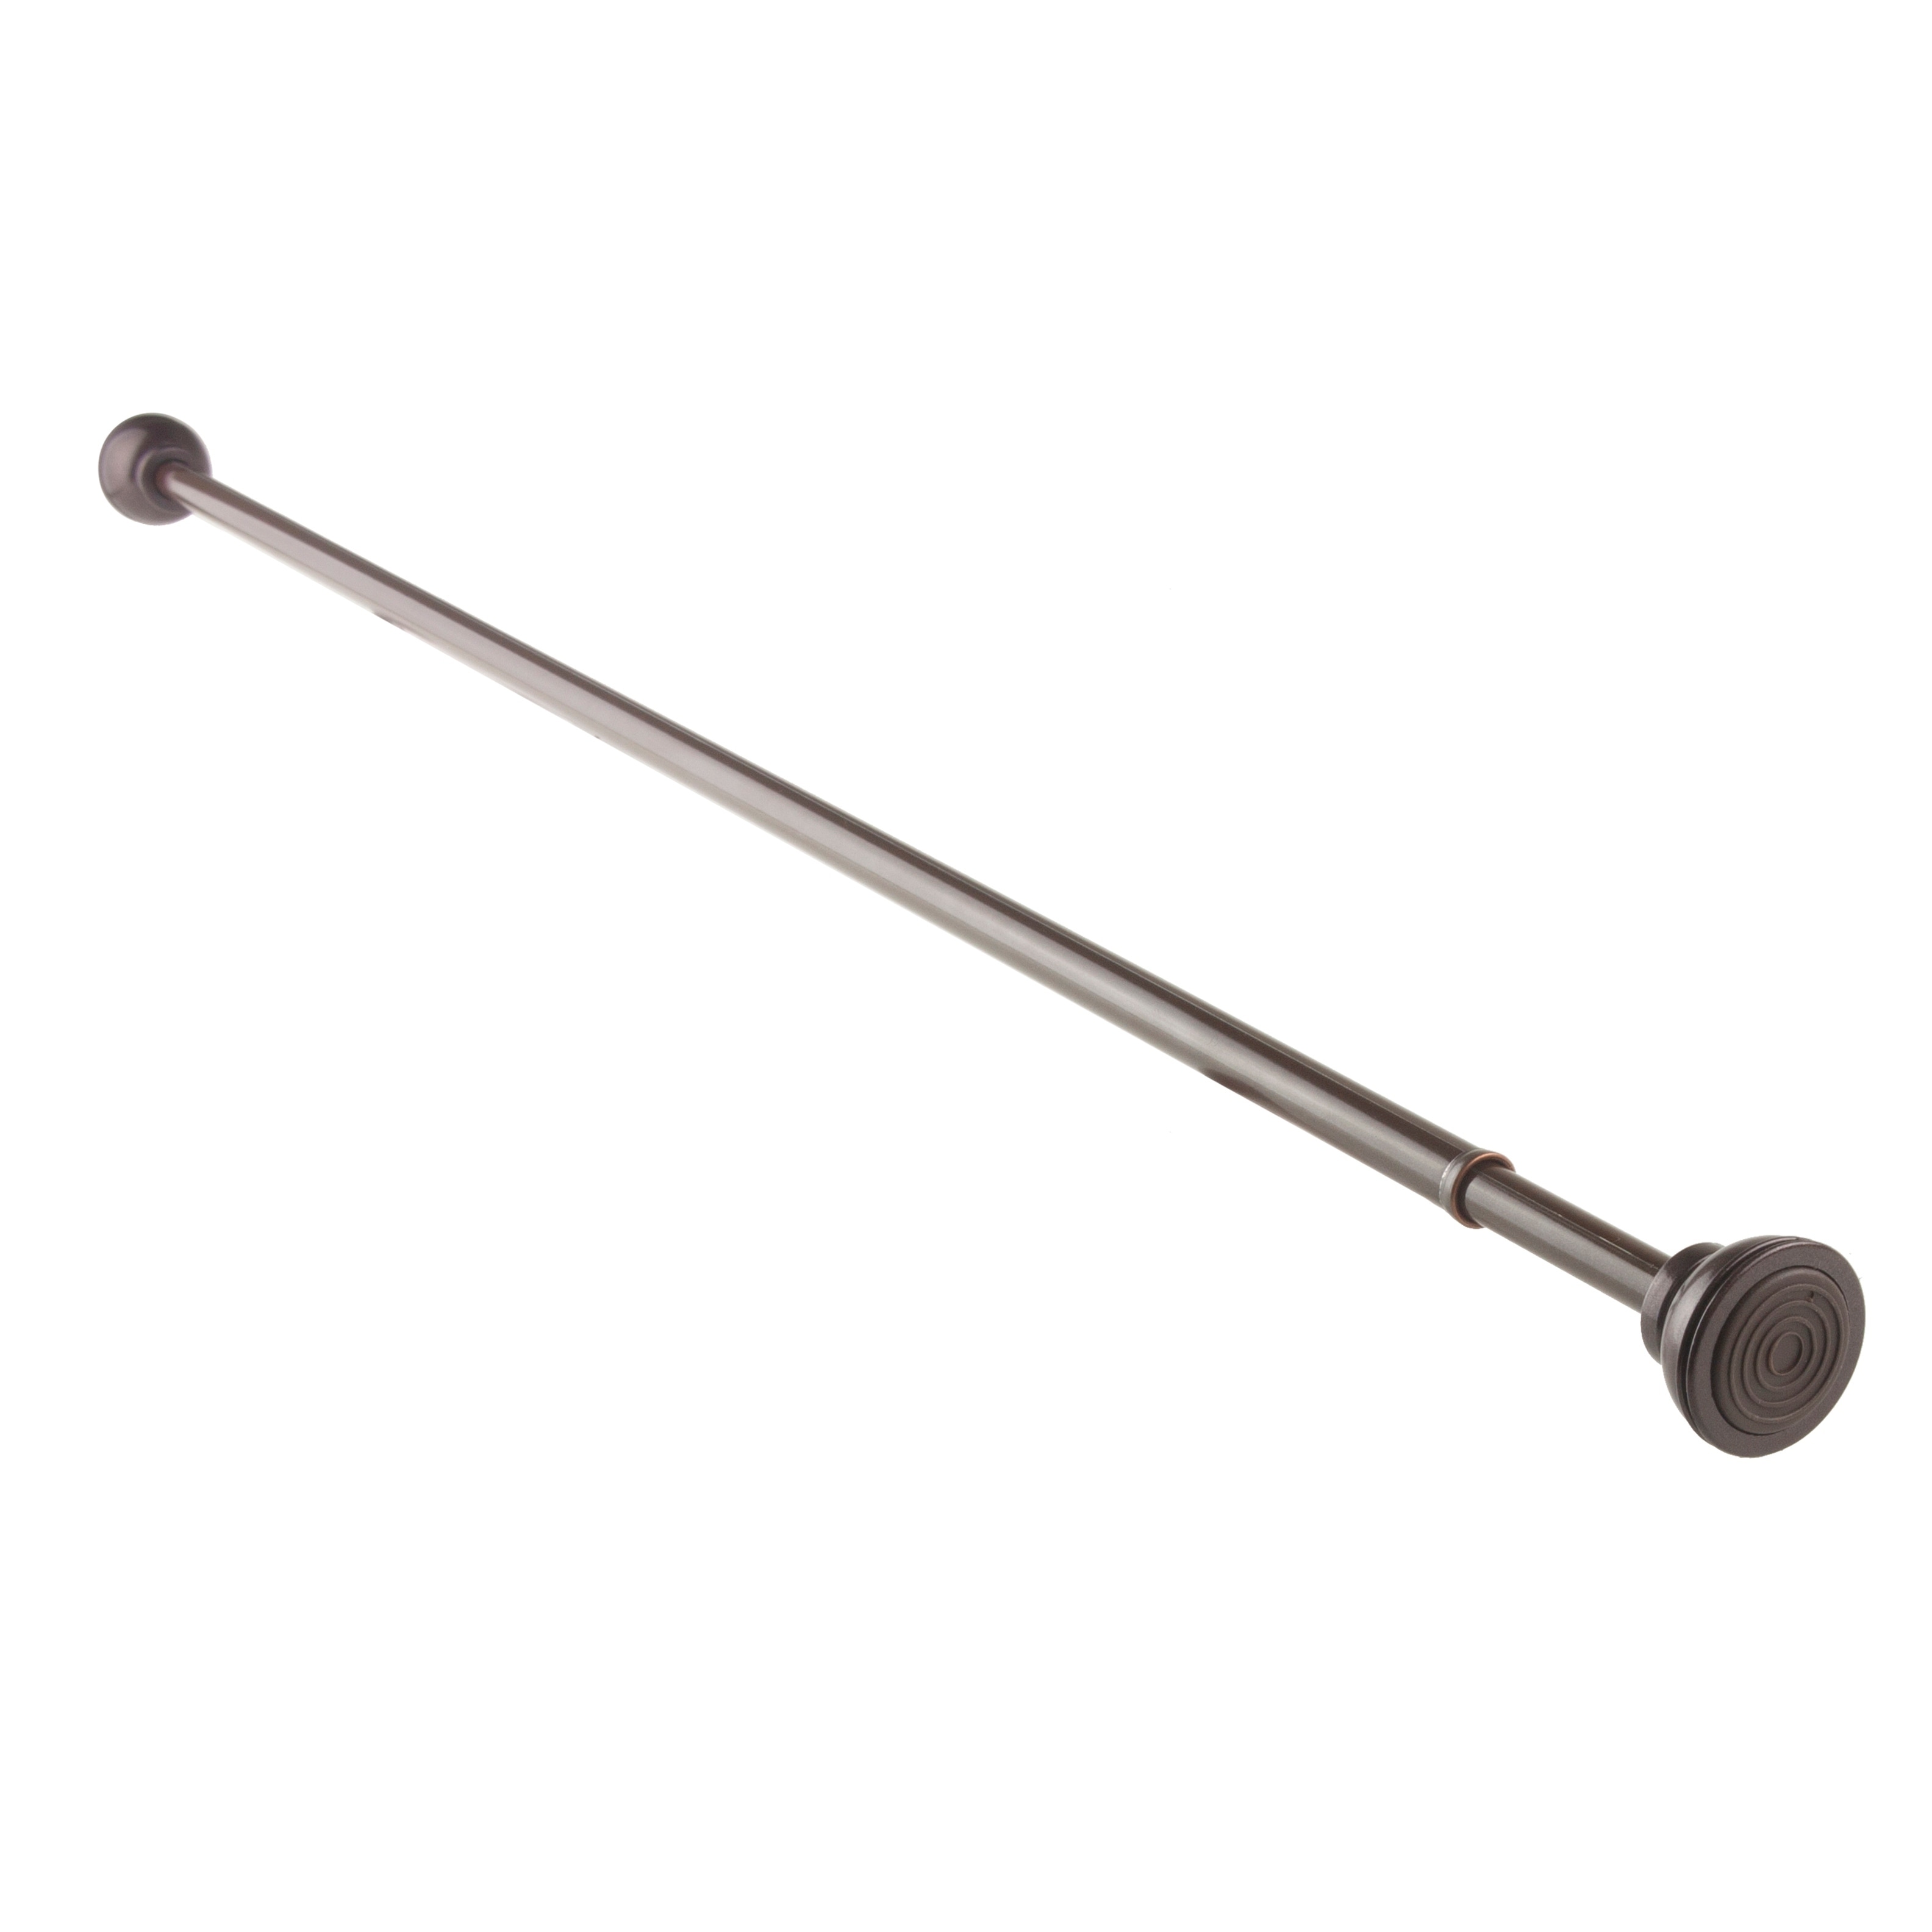 24 inch tension rod